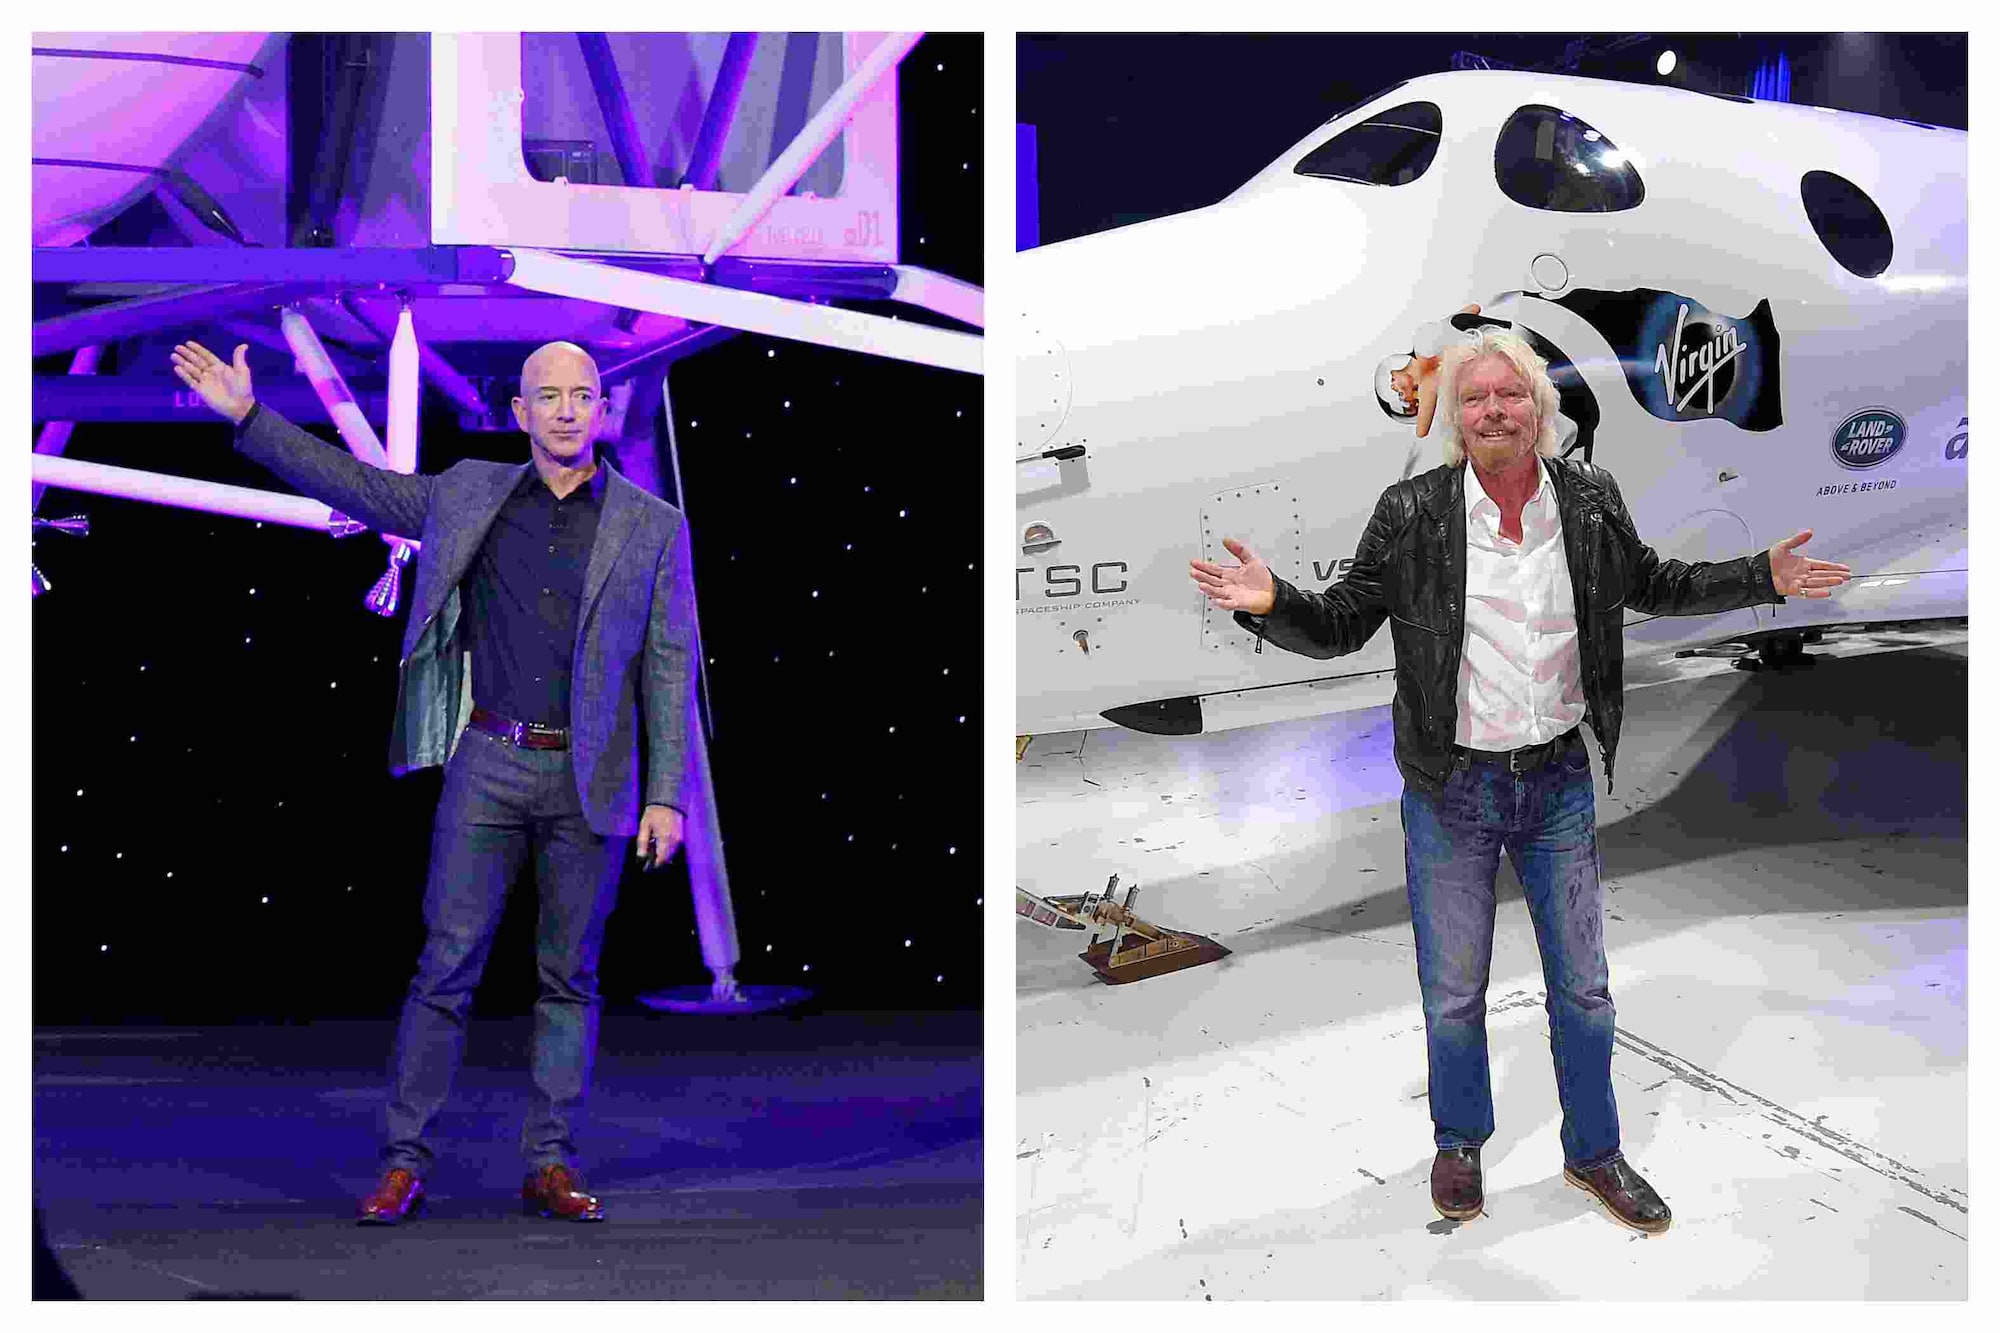 Billionaires Jeff Bezos and Richard Branson are competeing in a space race to be the first to go to space. Image credit: AP Photo/Mark J. Terrill